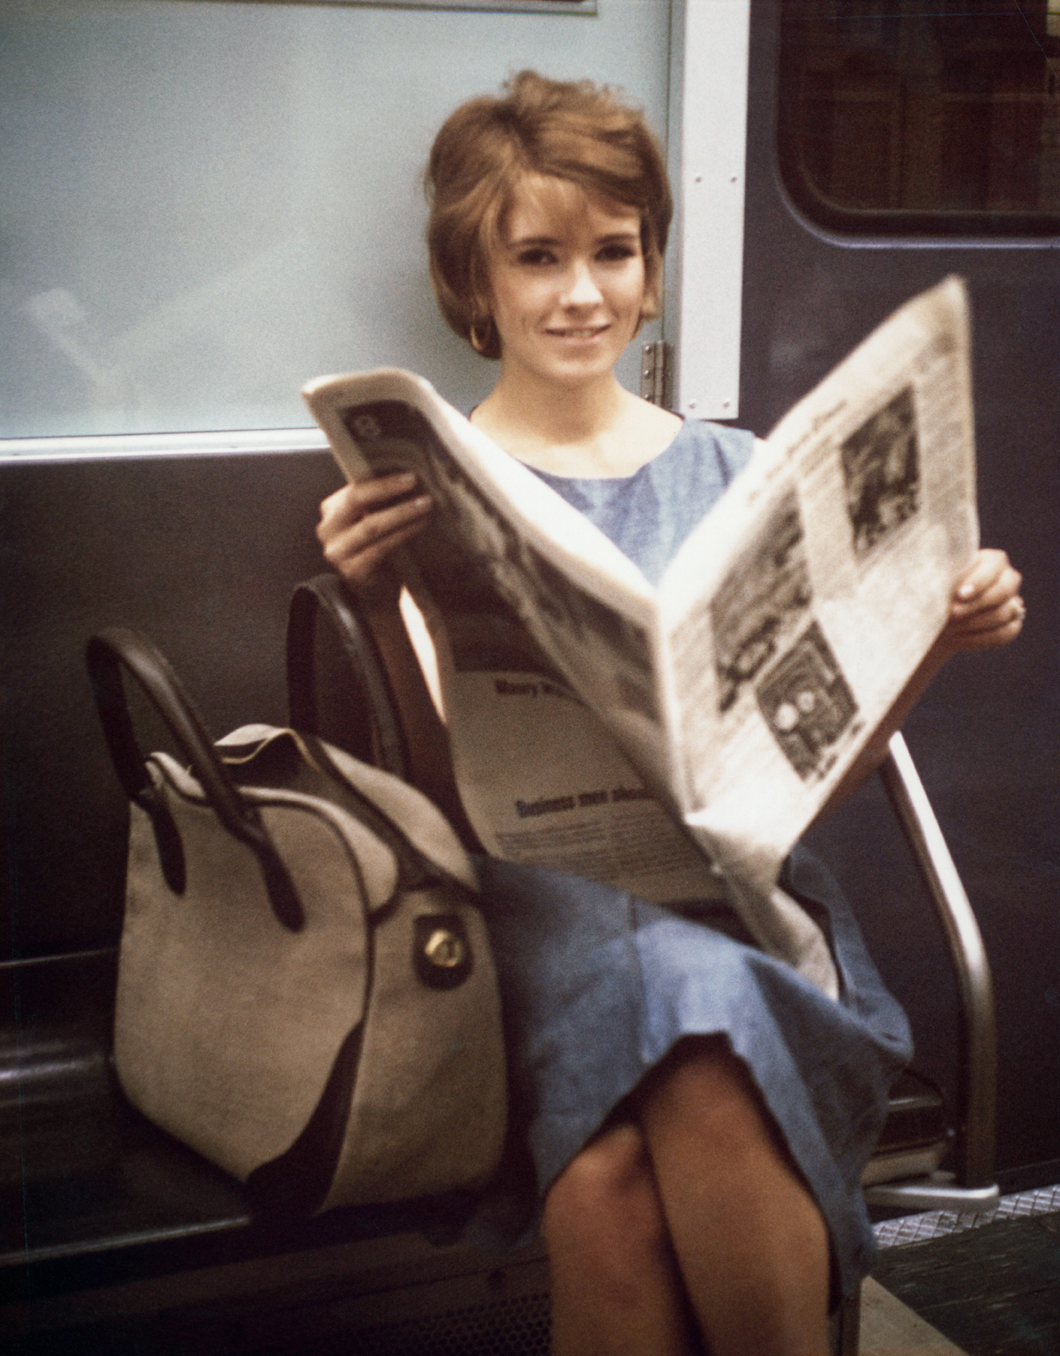 Martha Stewart on the NYC subway in the sixties.